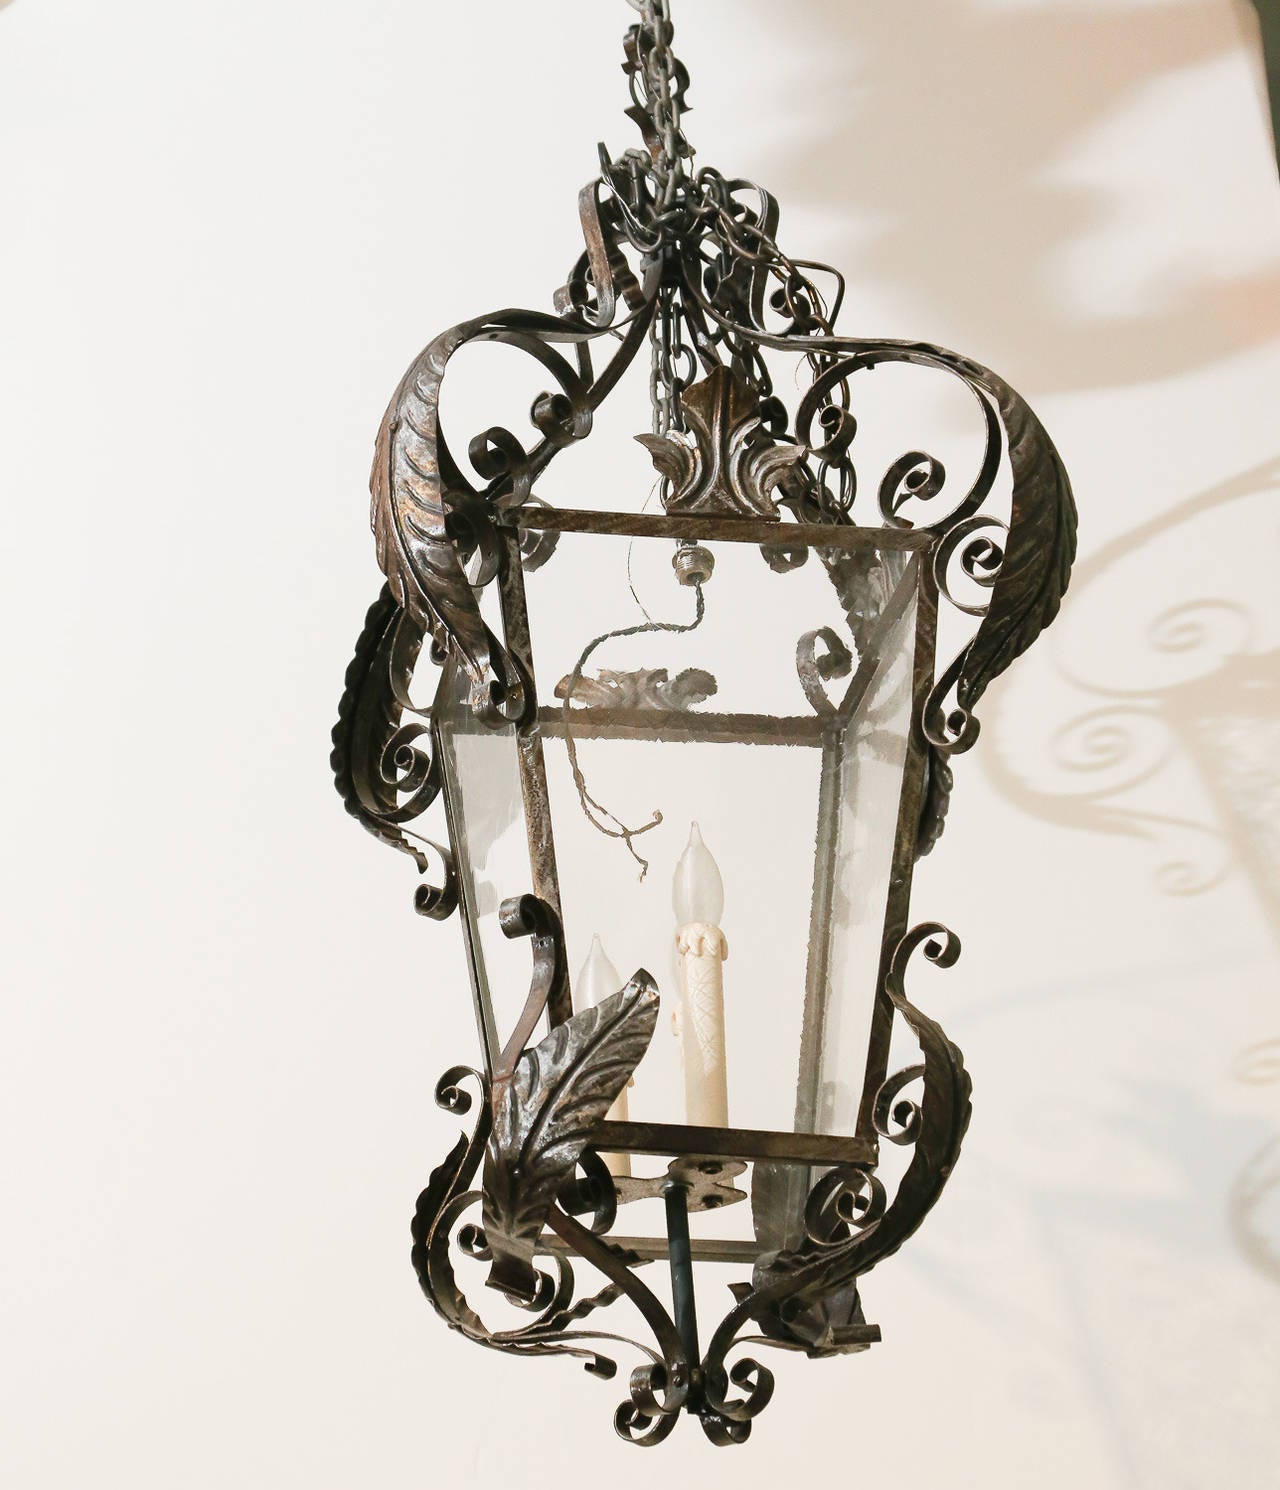 Pair of scrolled wrought iron three-lite lanterns with painted tole acanthus leaves applied.

Has matching ceiling canopies to match